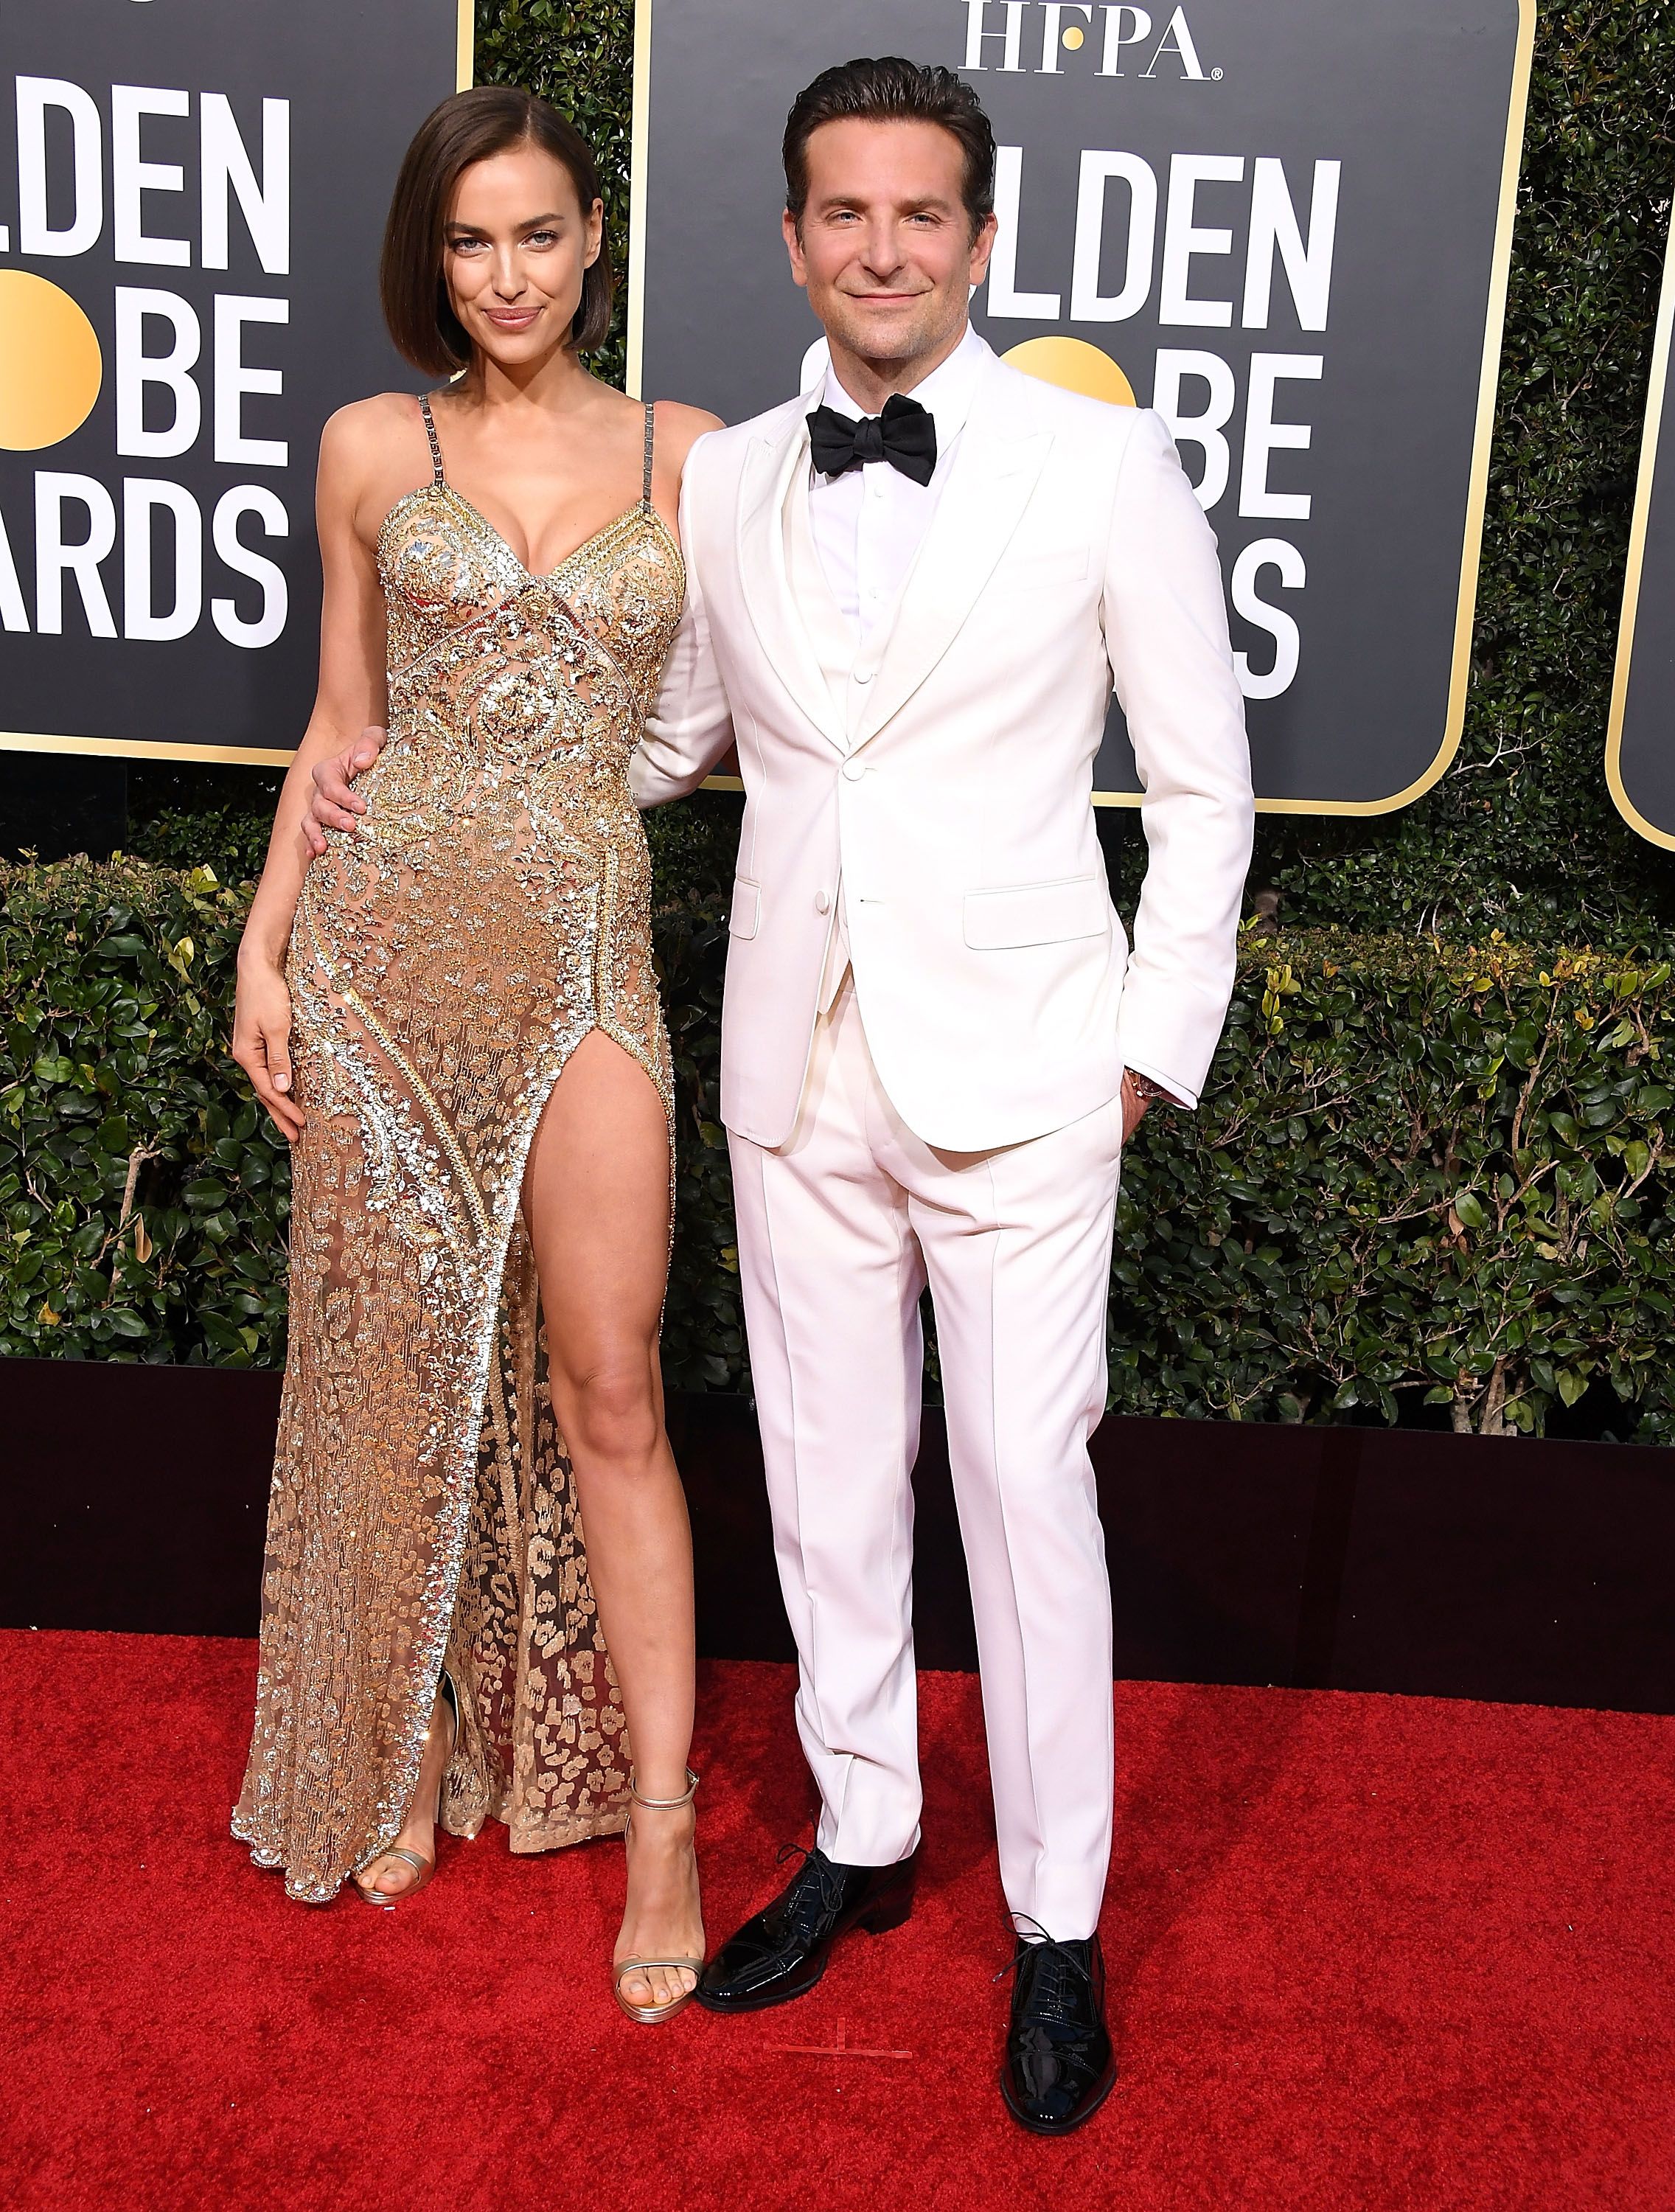 Golden Globes 2019: The Celebrity Couples on the Red Carpet